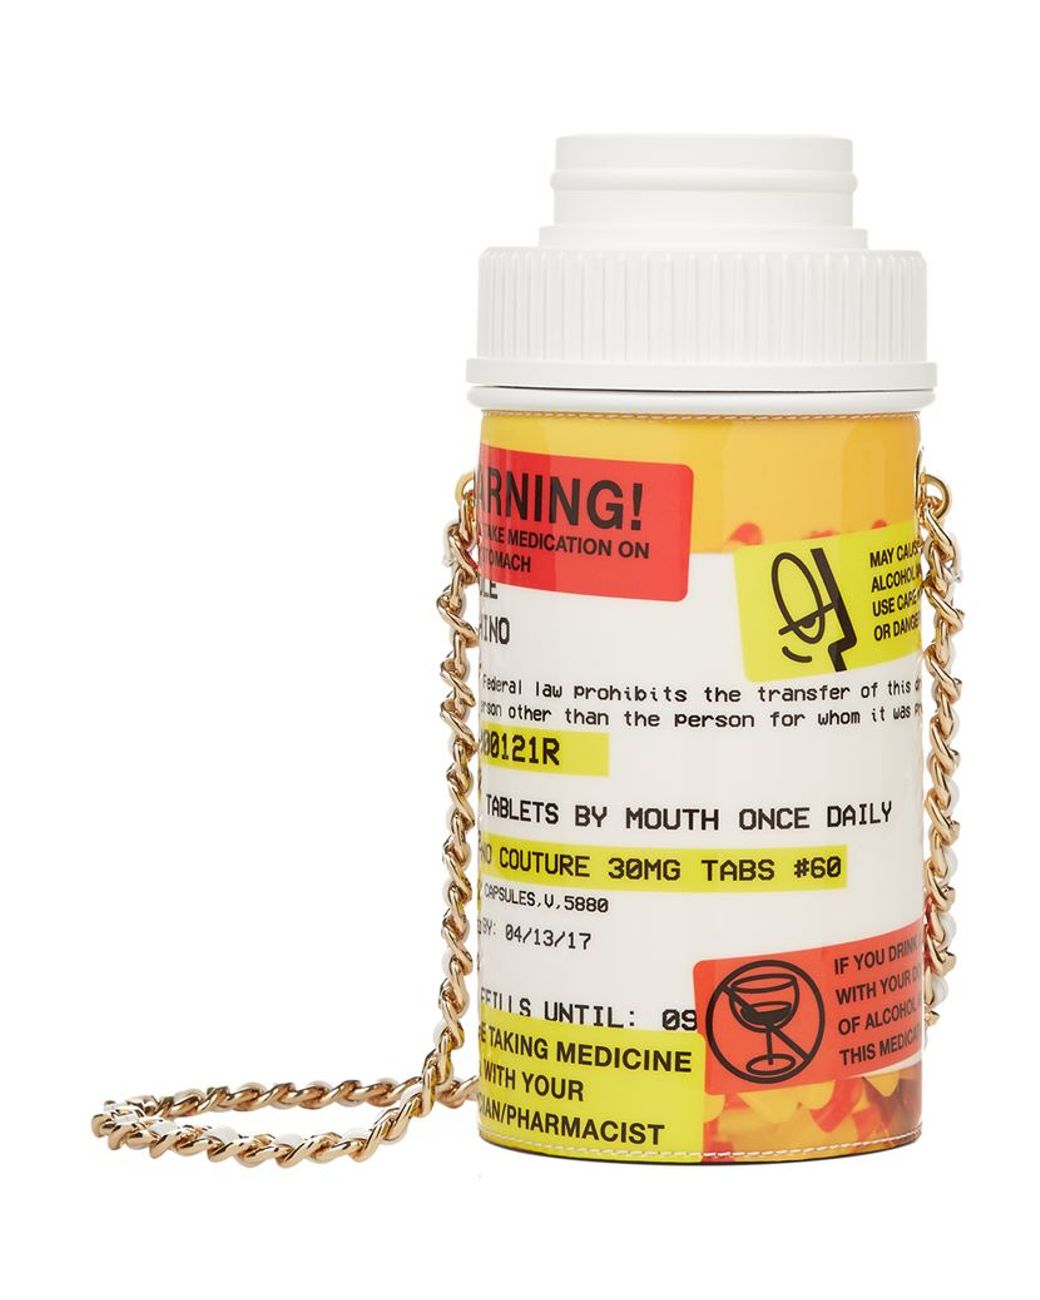 People are not happy with Moschino's new pill-themed fashion